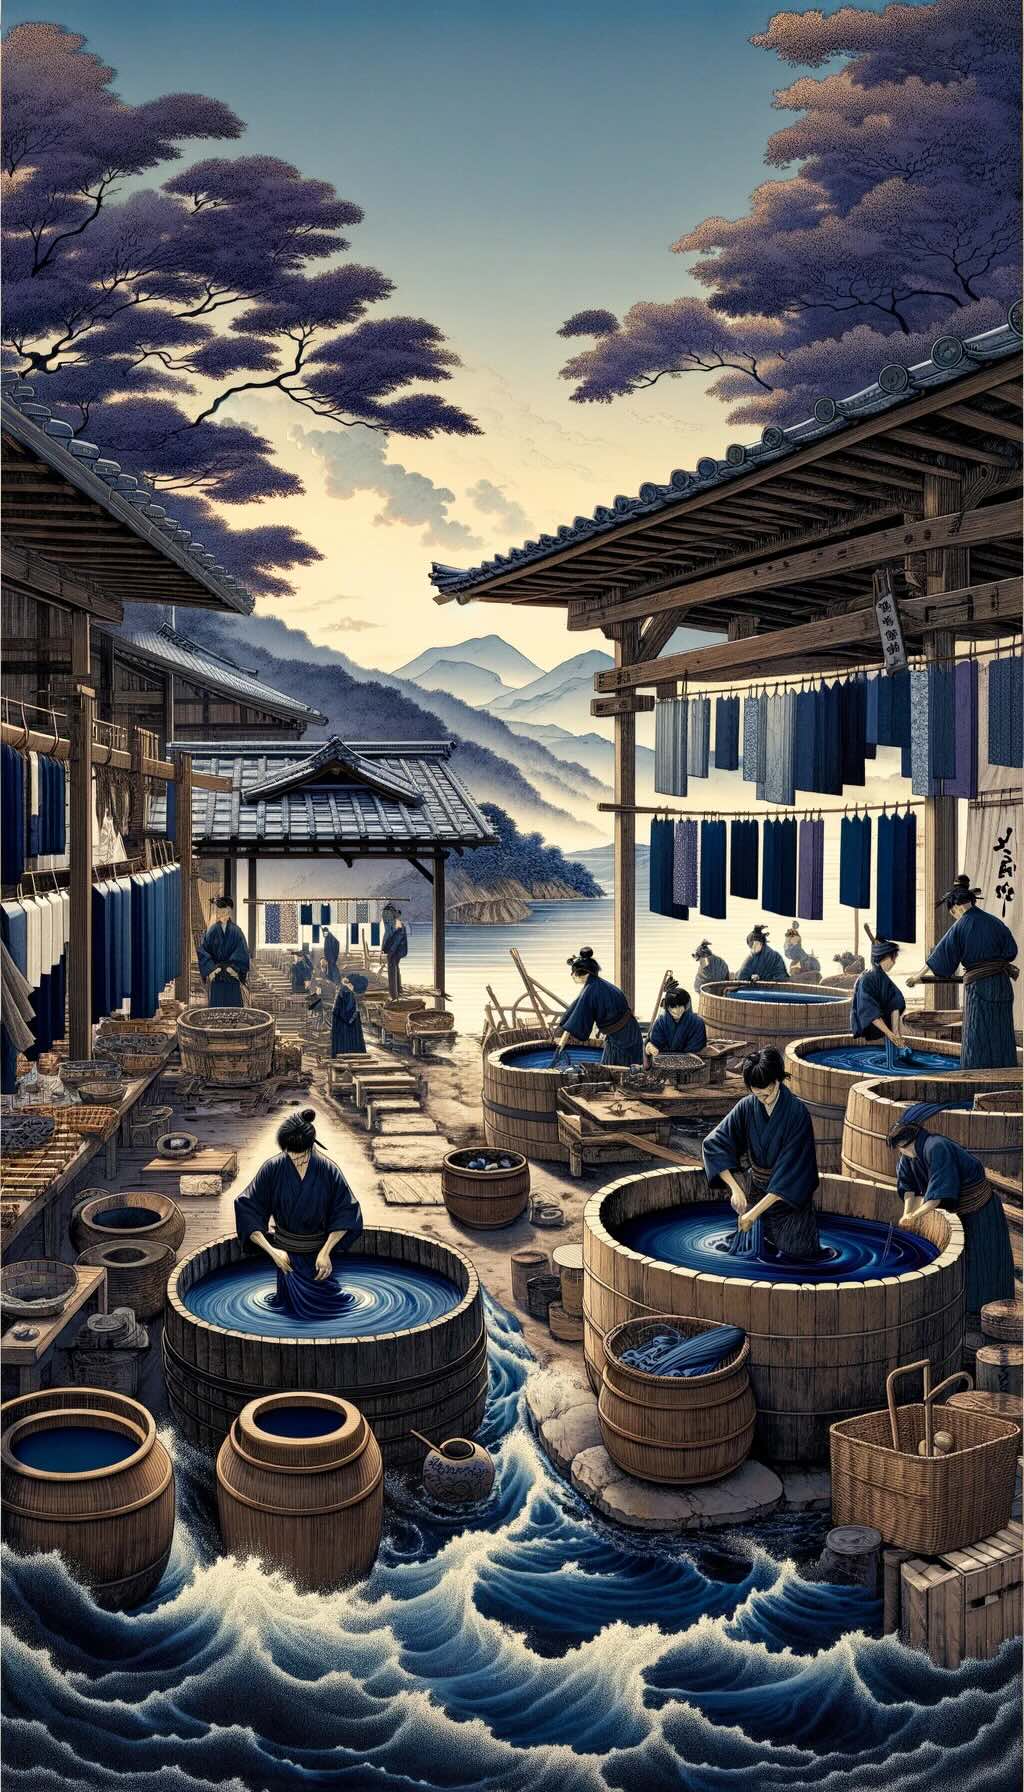 Traditional craftsmanship in Japan illustrates the indigo dyeing of Tokushima and the pottery of Bizen, showcasing the skill, heritage, and artistry of these crafts